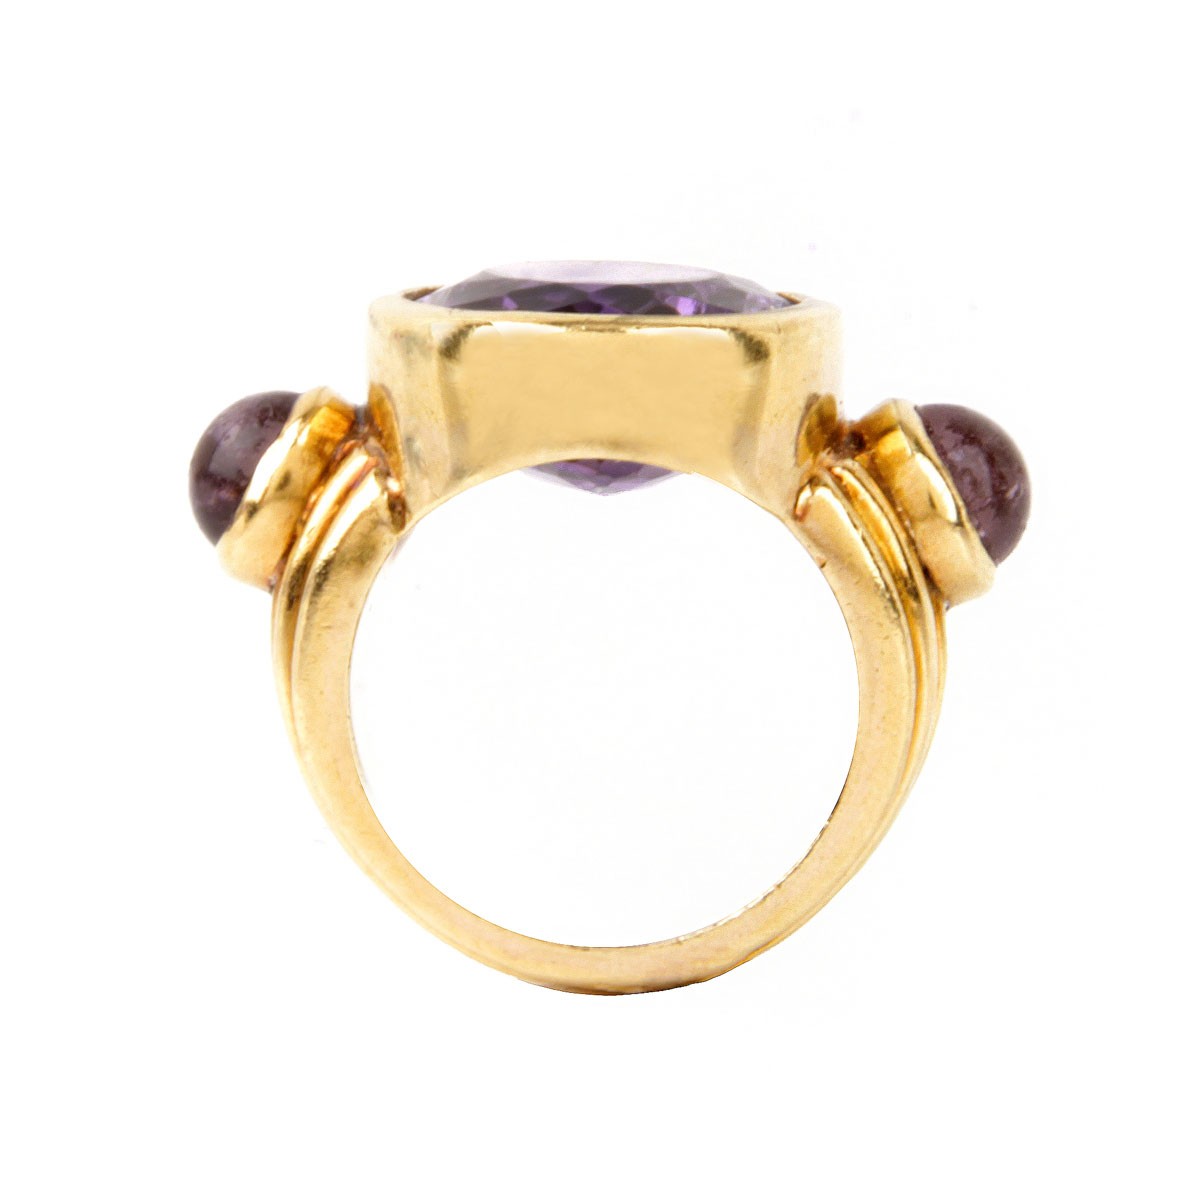 Vintage Amethyst and 18K Ring - Image 5 of 7